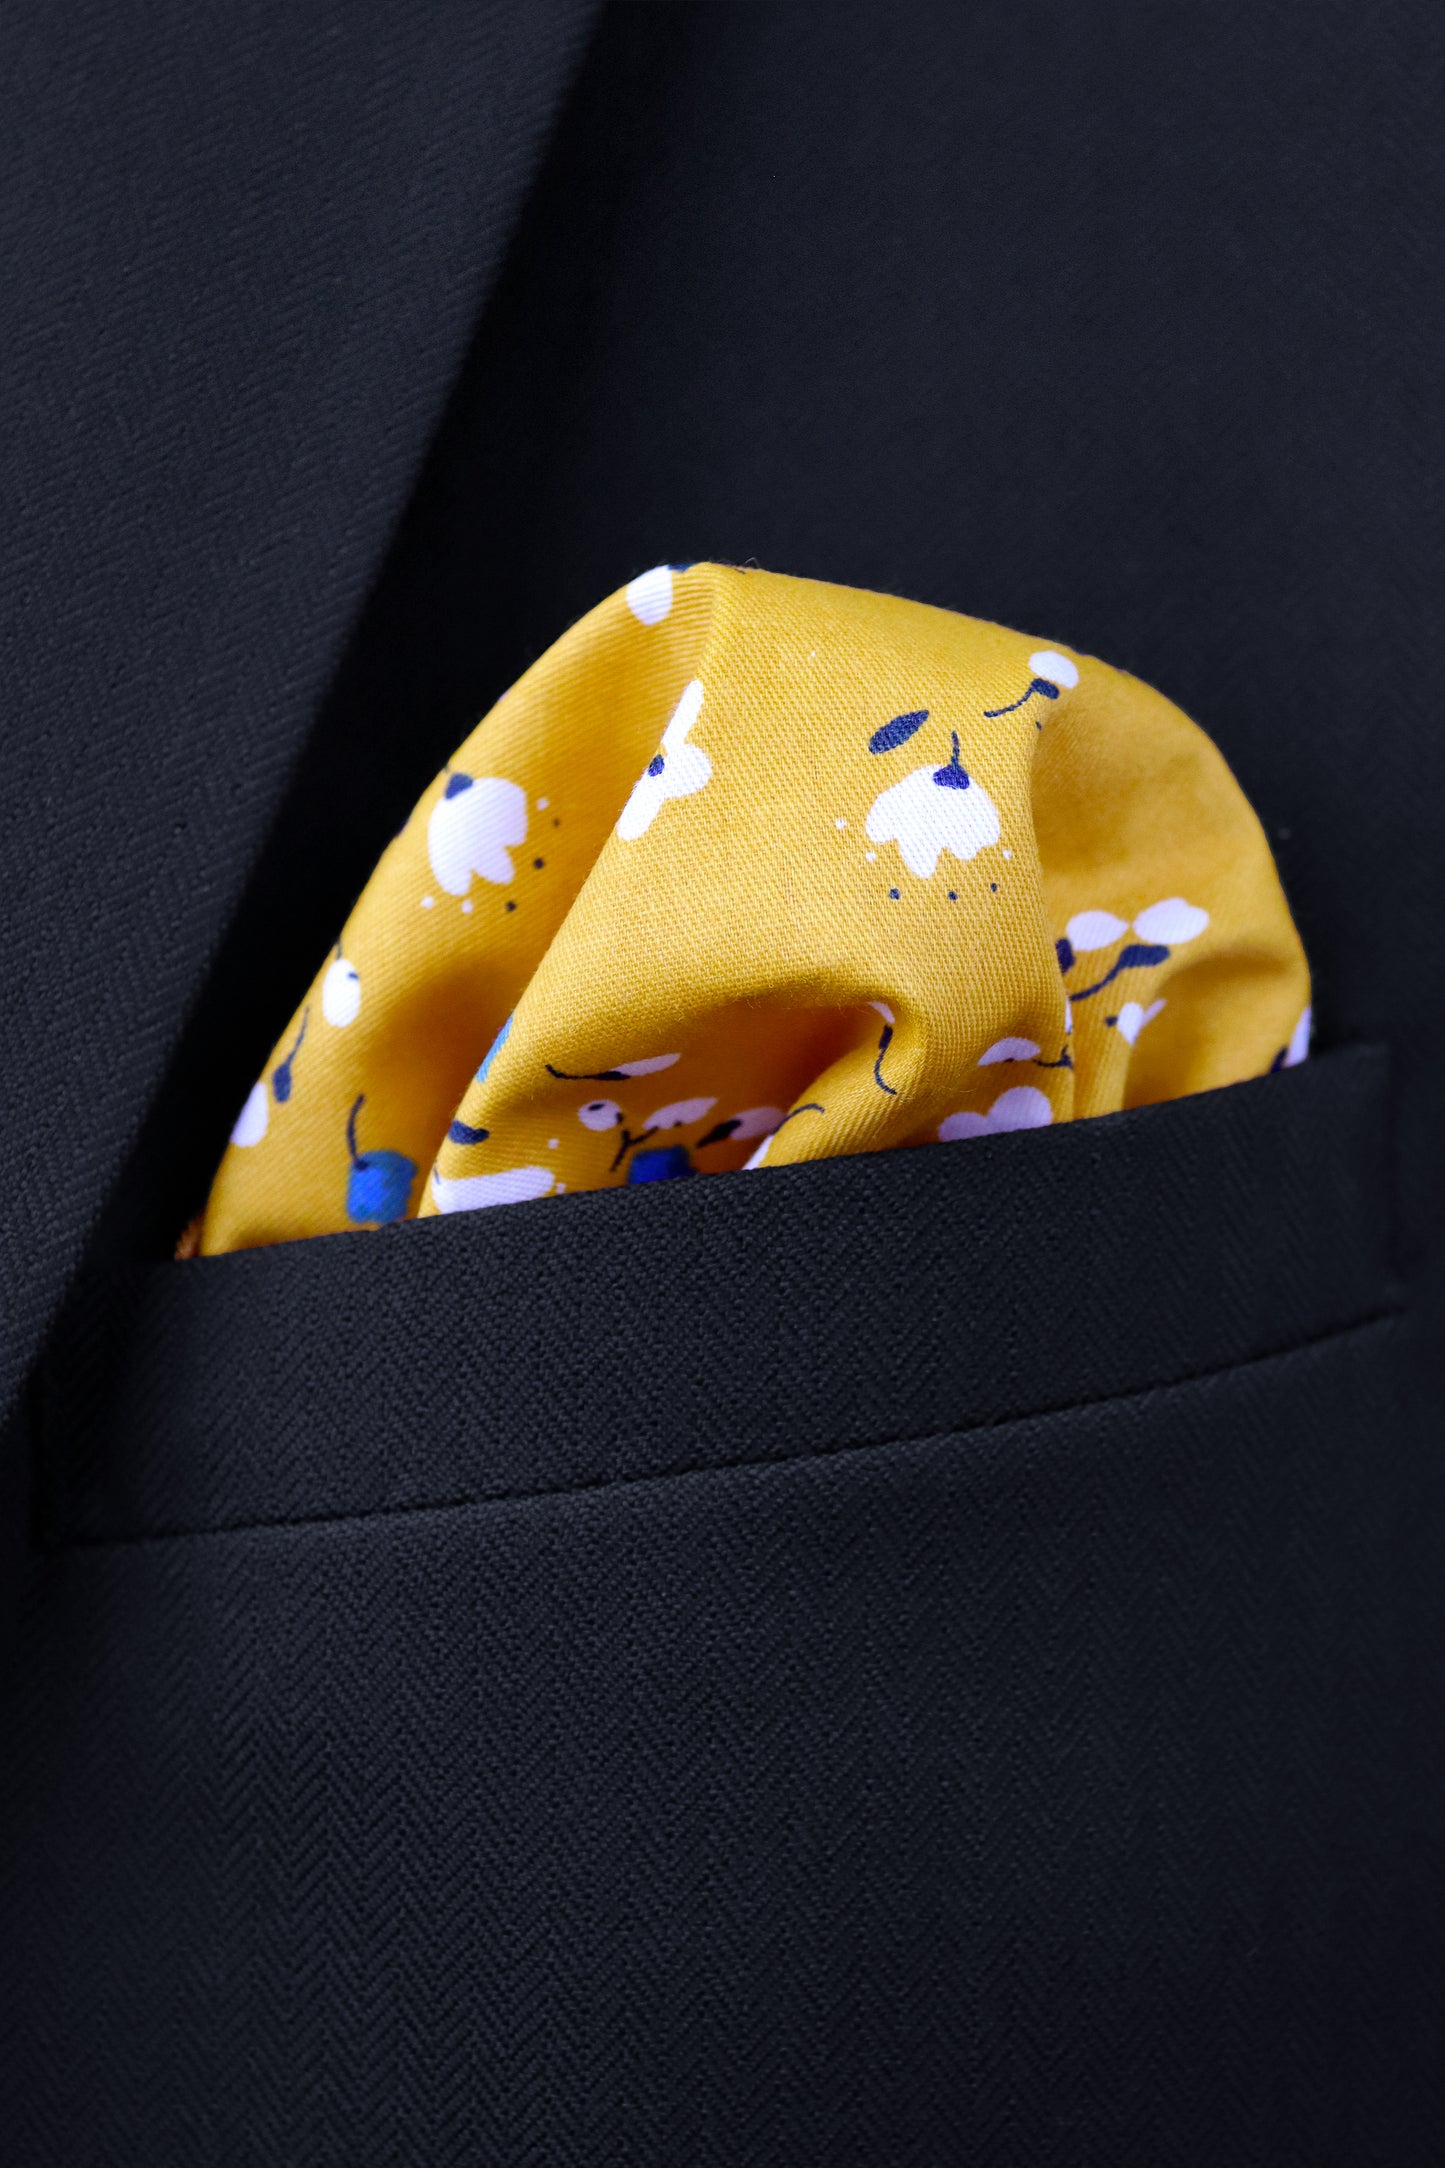 100% Cotton Floral Print Bow Tie - Yellow & Blue